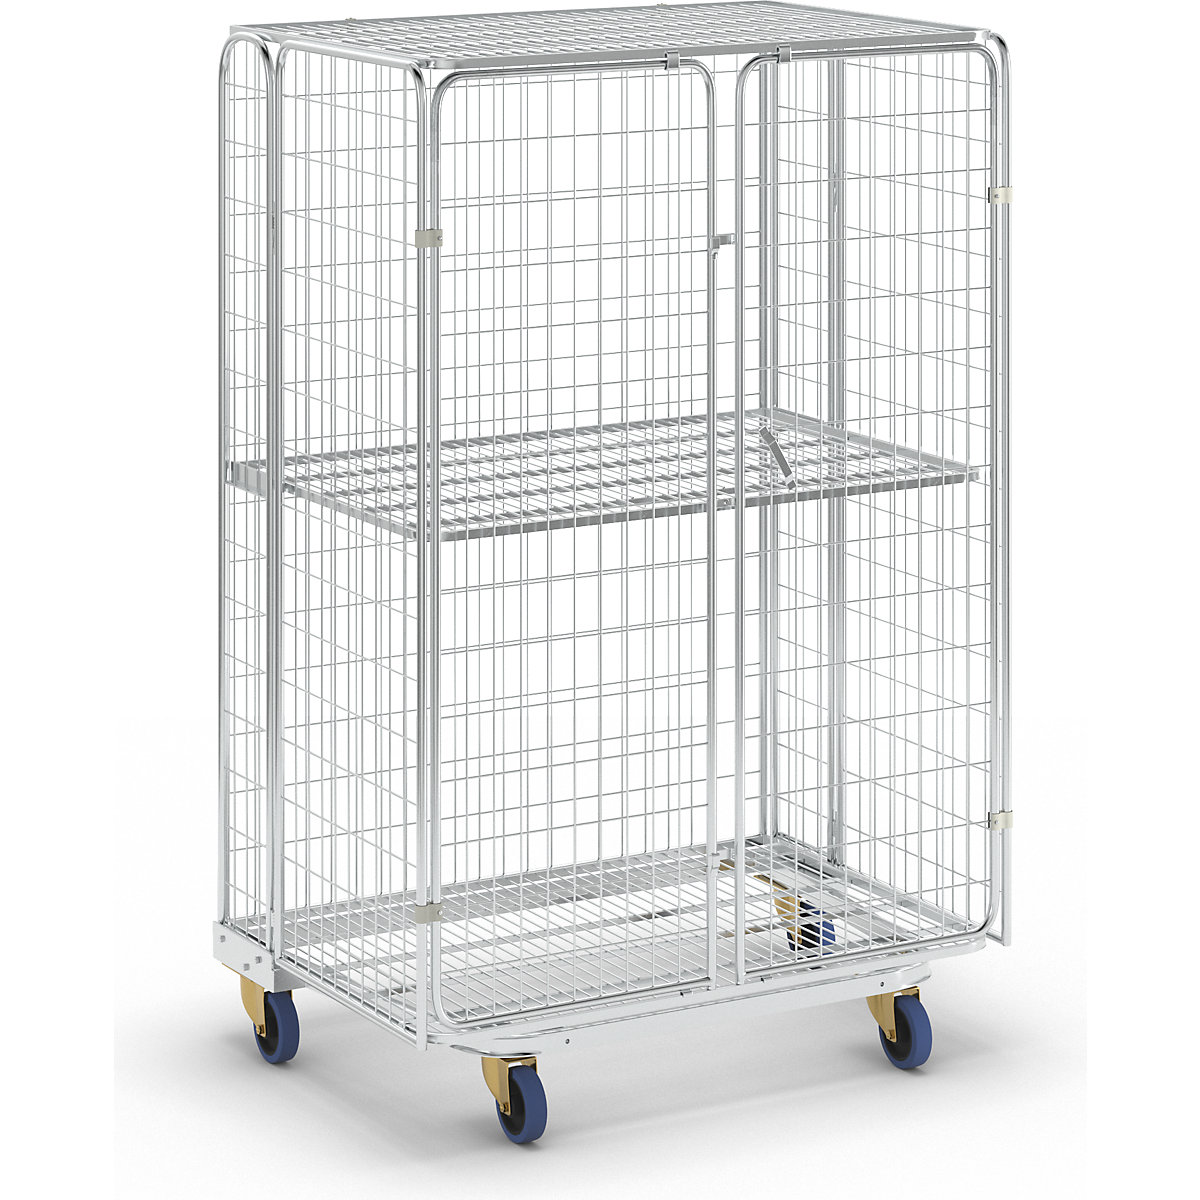 Security roll container, nestable